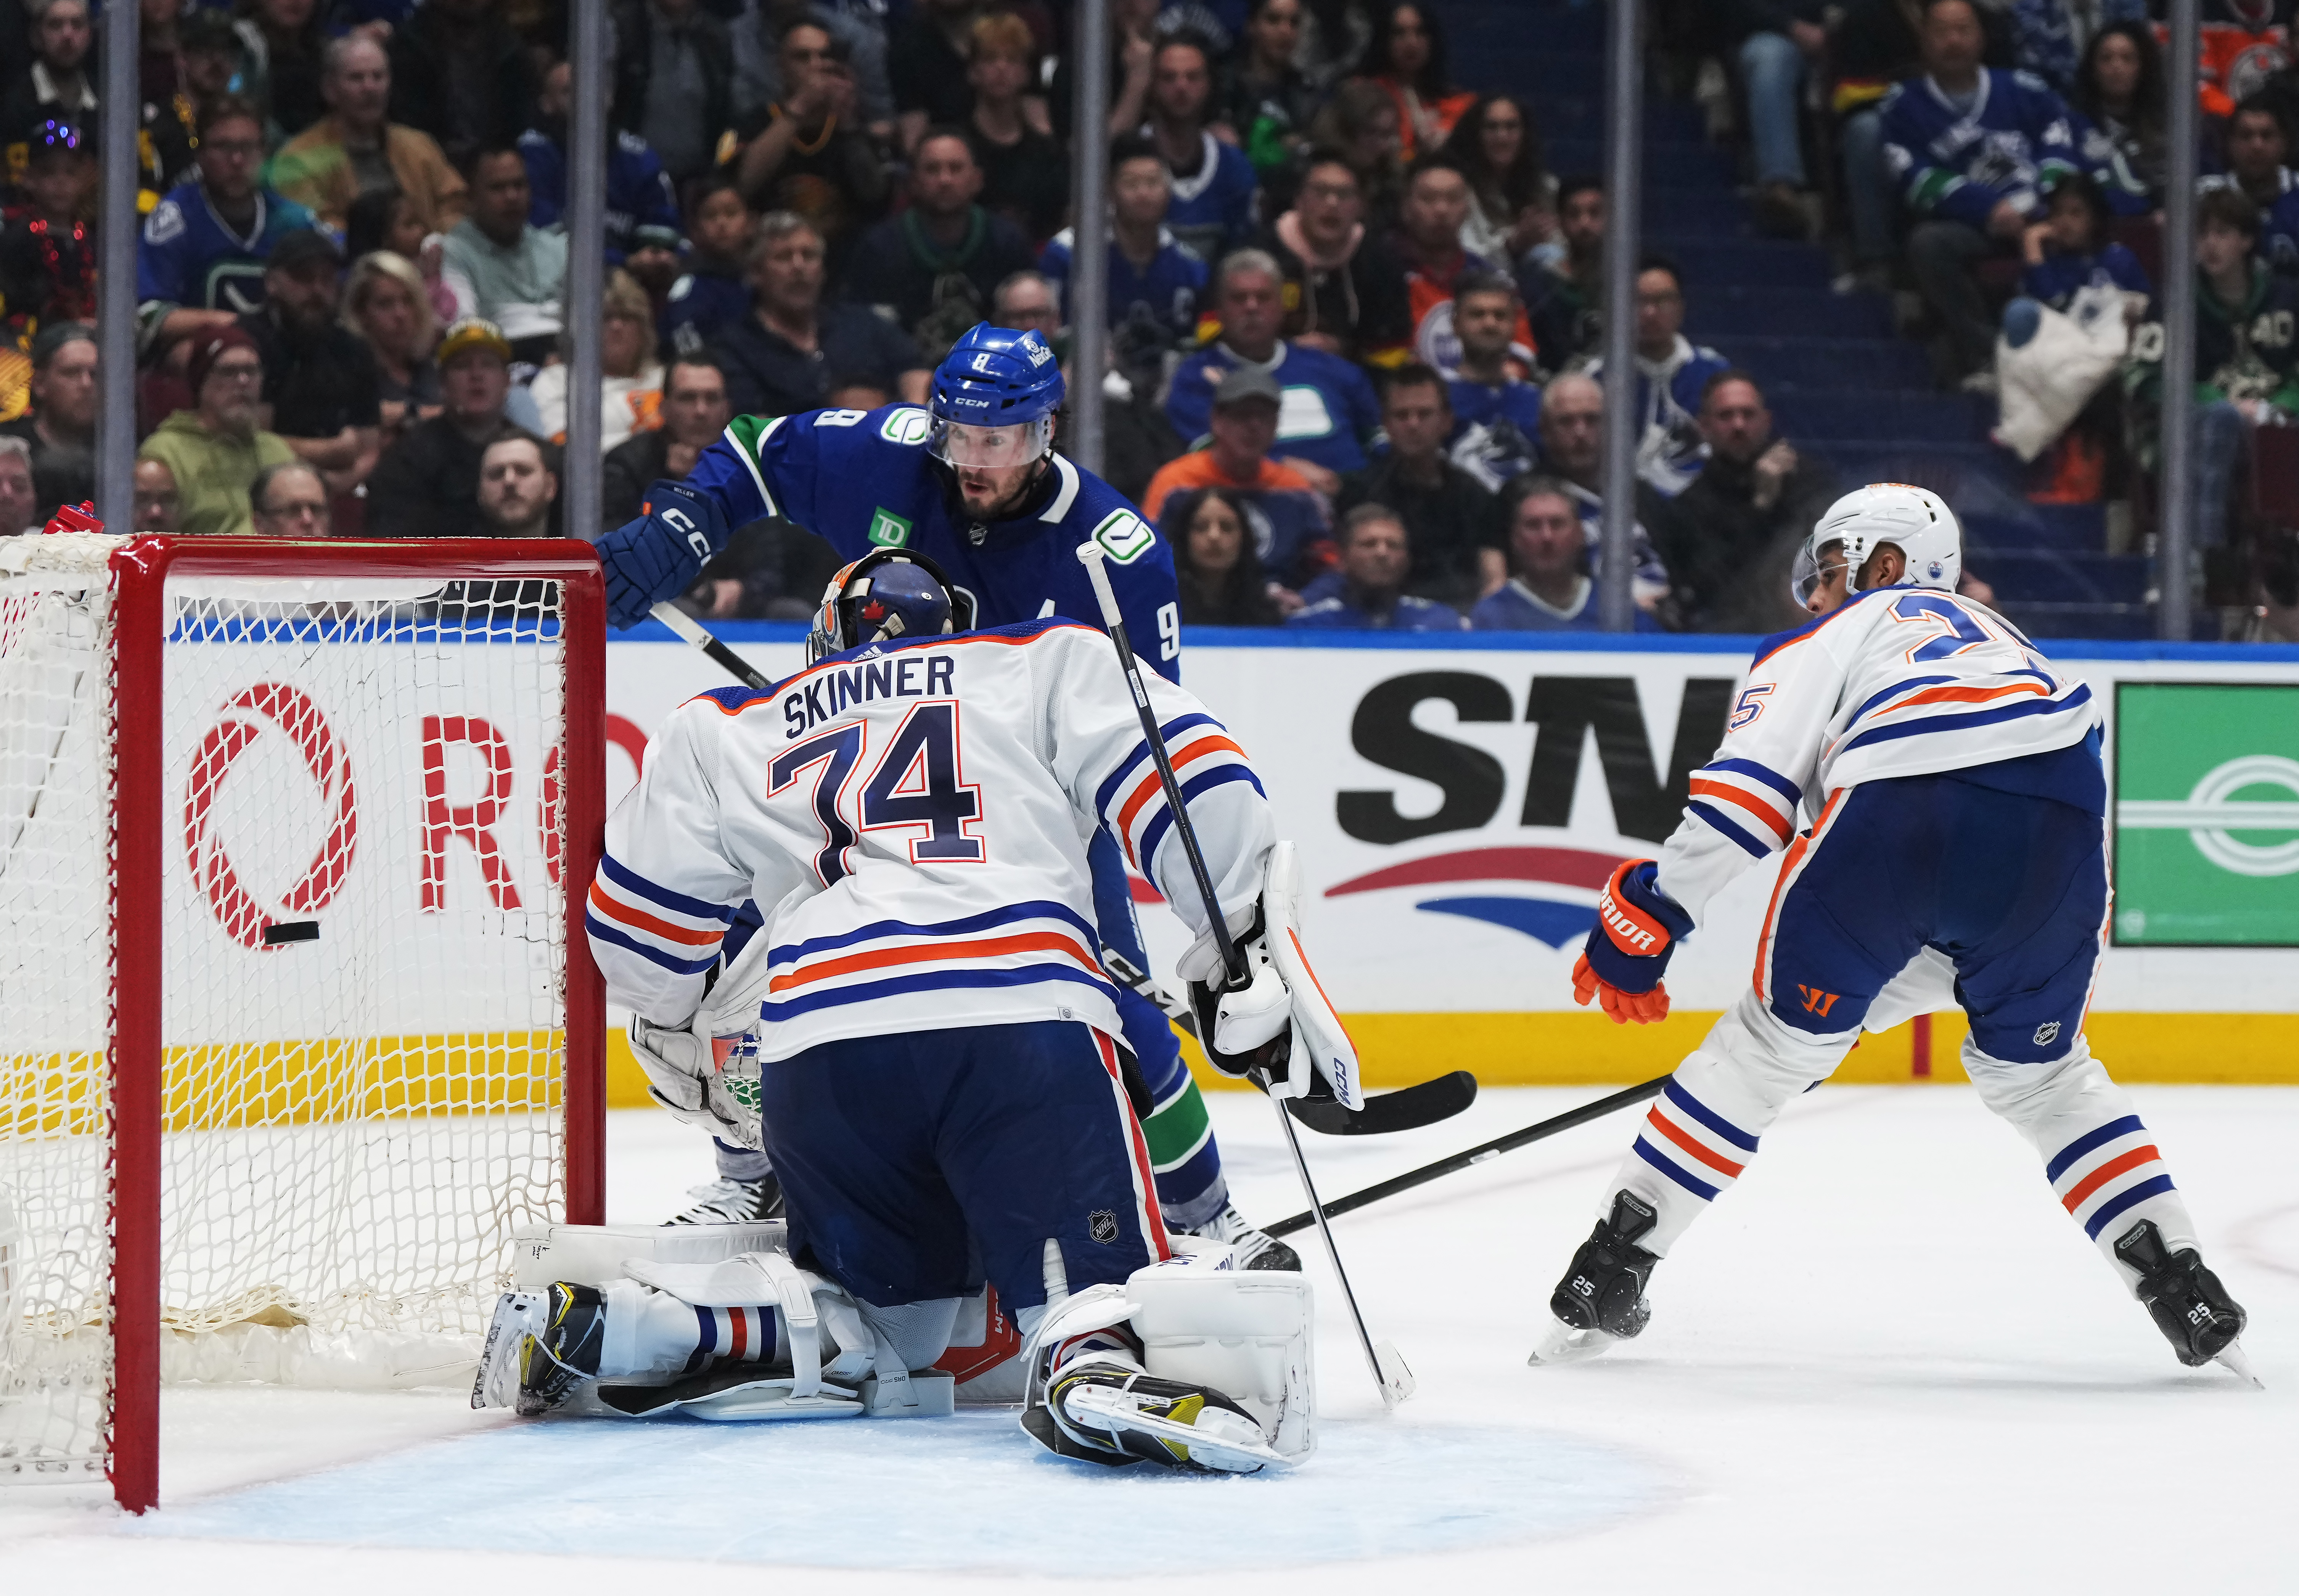 Edmonton Oilers collapse in Game 1 against Canucks